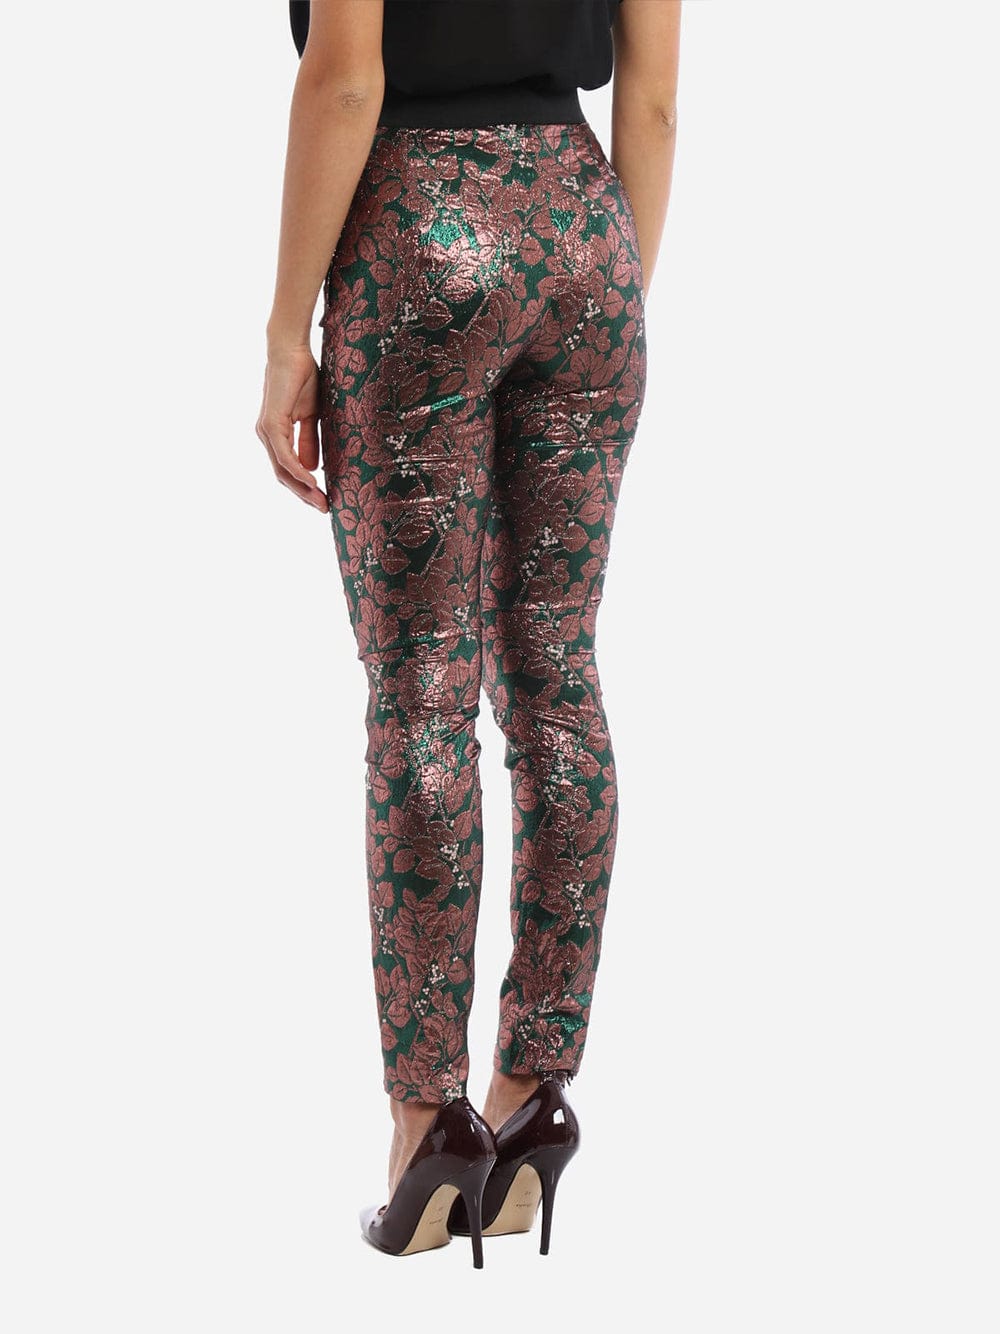 Missguided Dorothie Floral Print Cigarette Trousers Navy, $50 | Missguided  | Lookastic